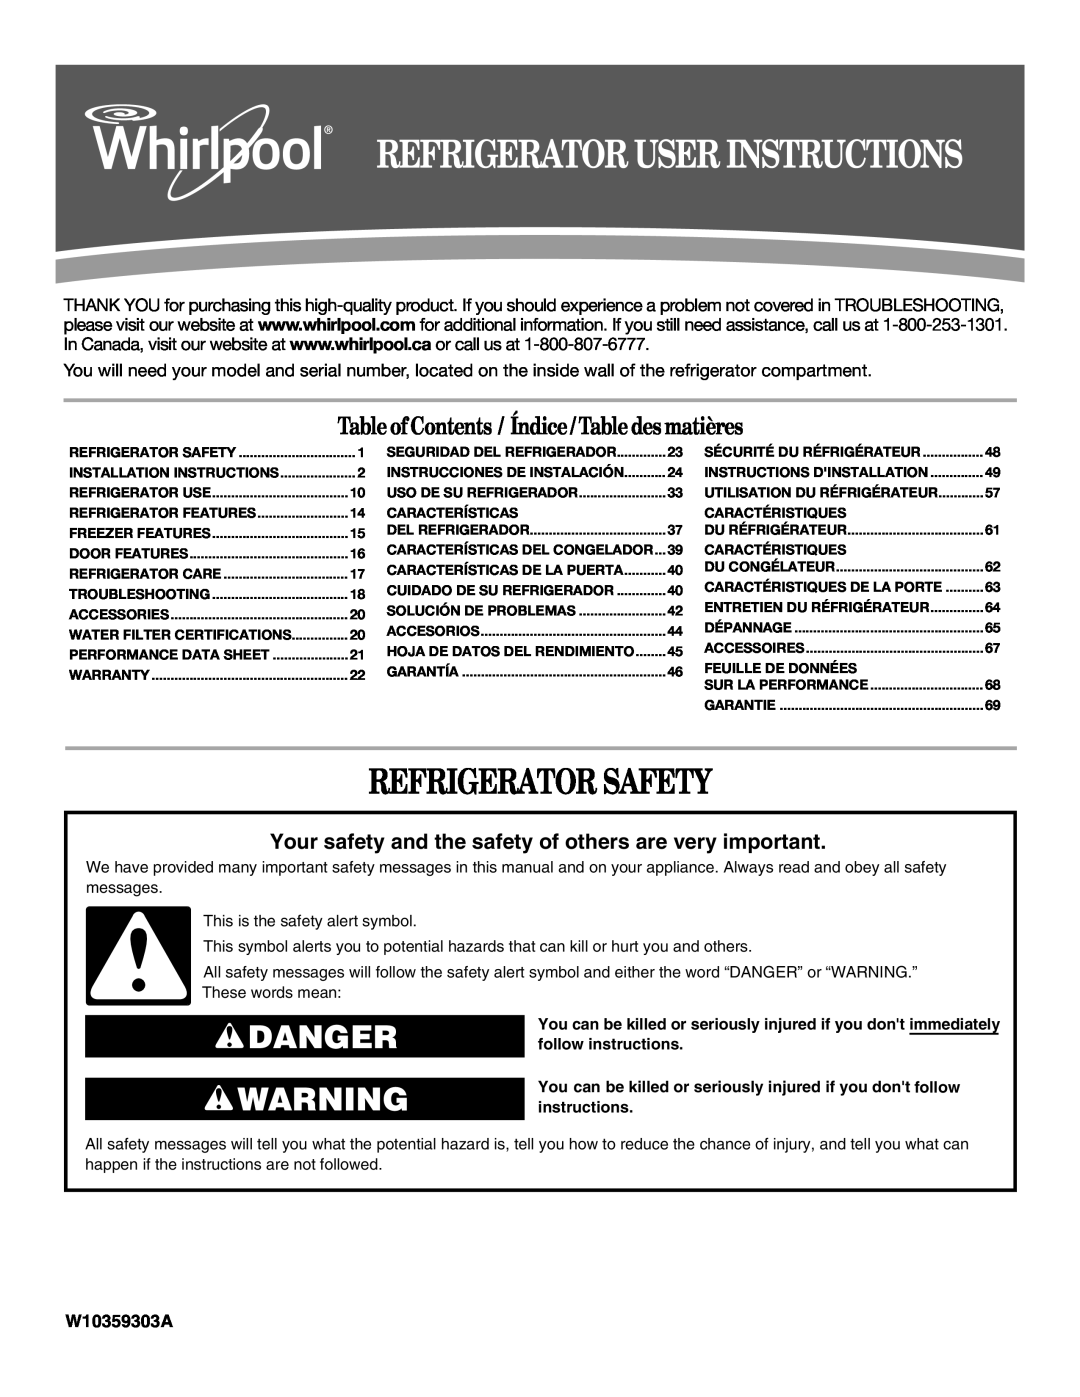 Whirlpool W10359303A installation instructions Refrigerator Safety, Danger, Table ofContents / Índice / Table des matières 